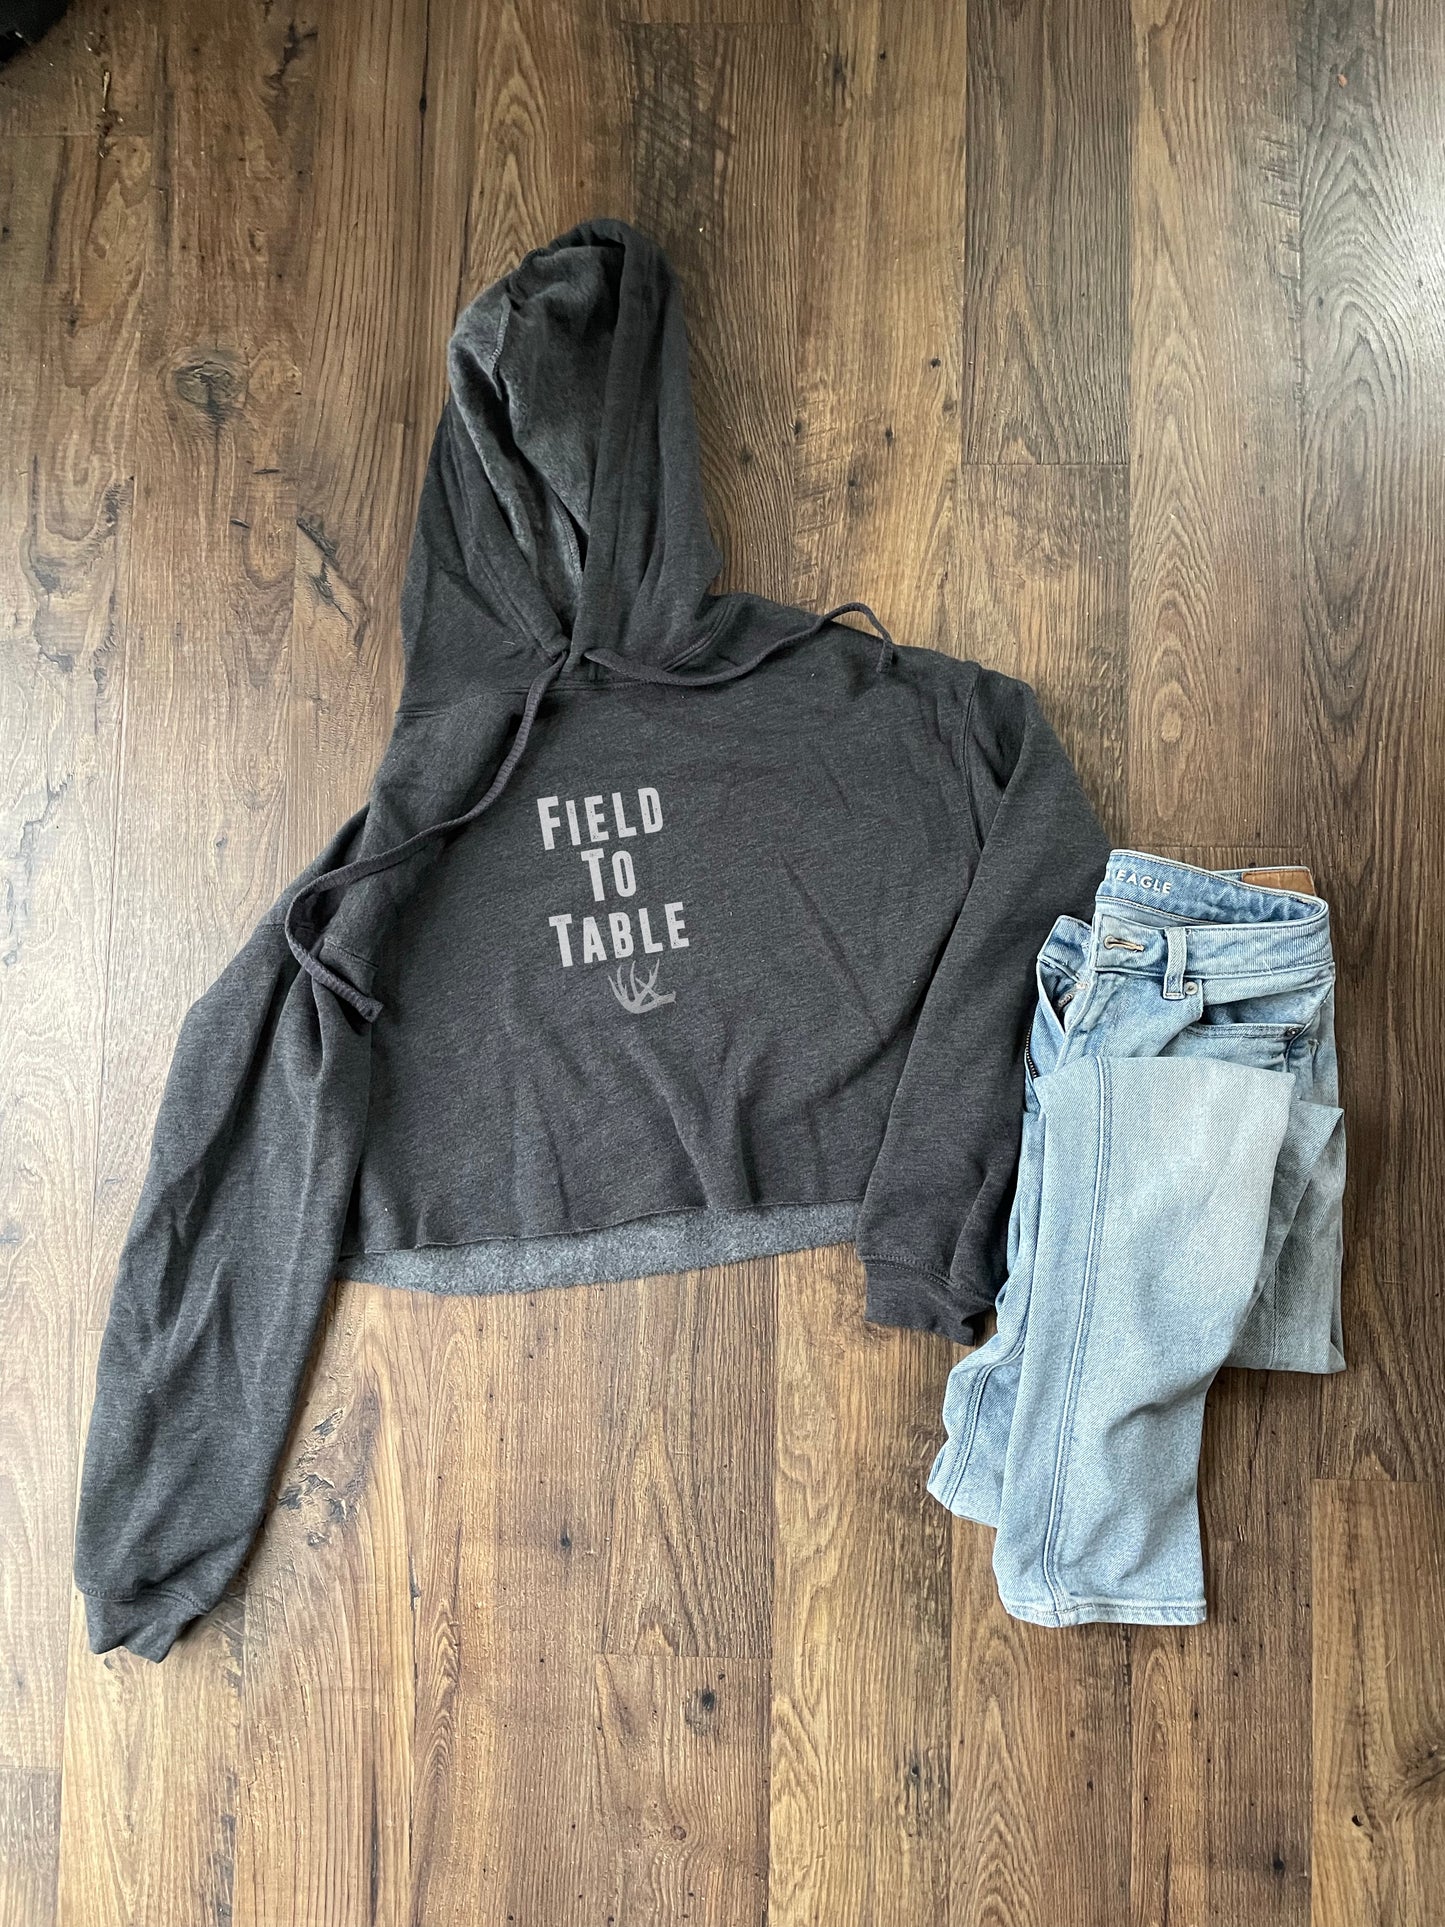 Field to Table Women’s cropped hoodie